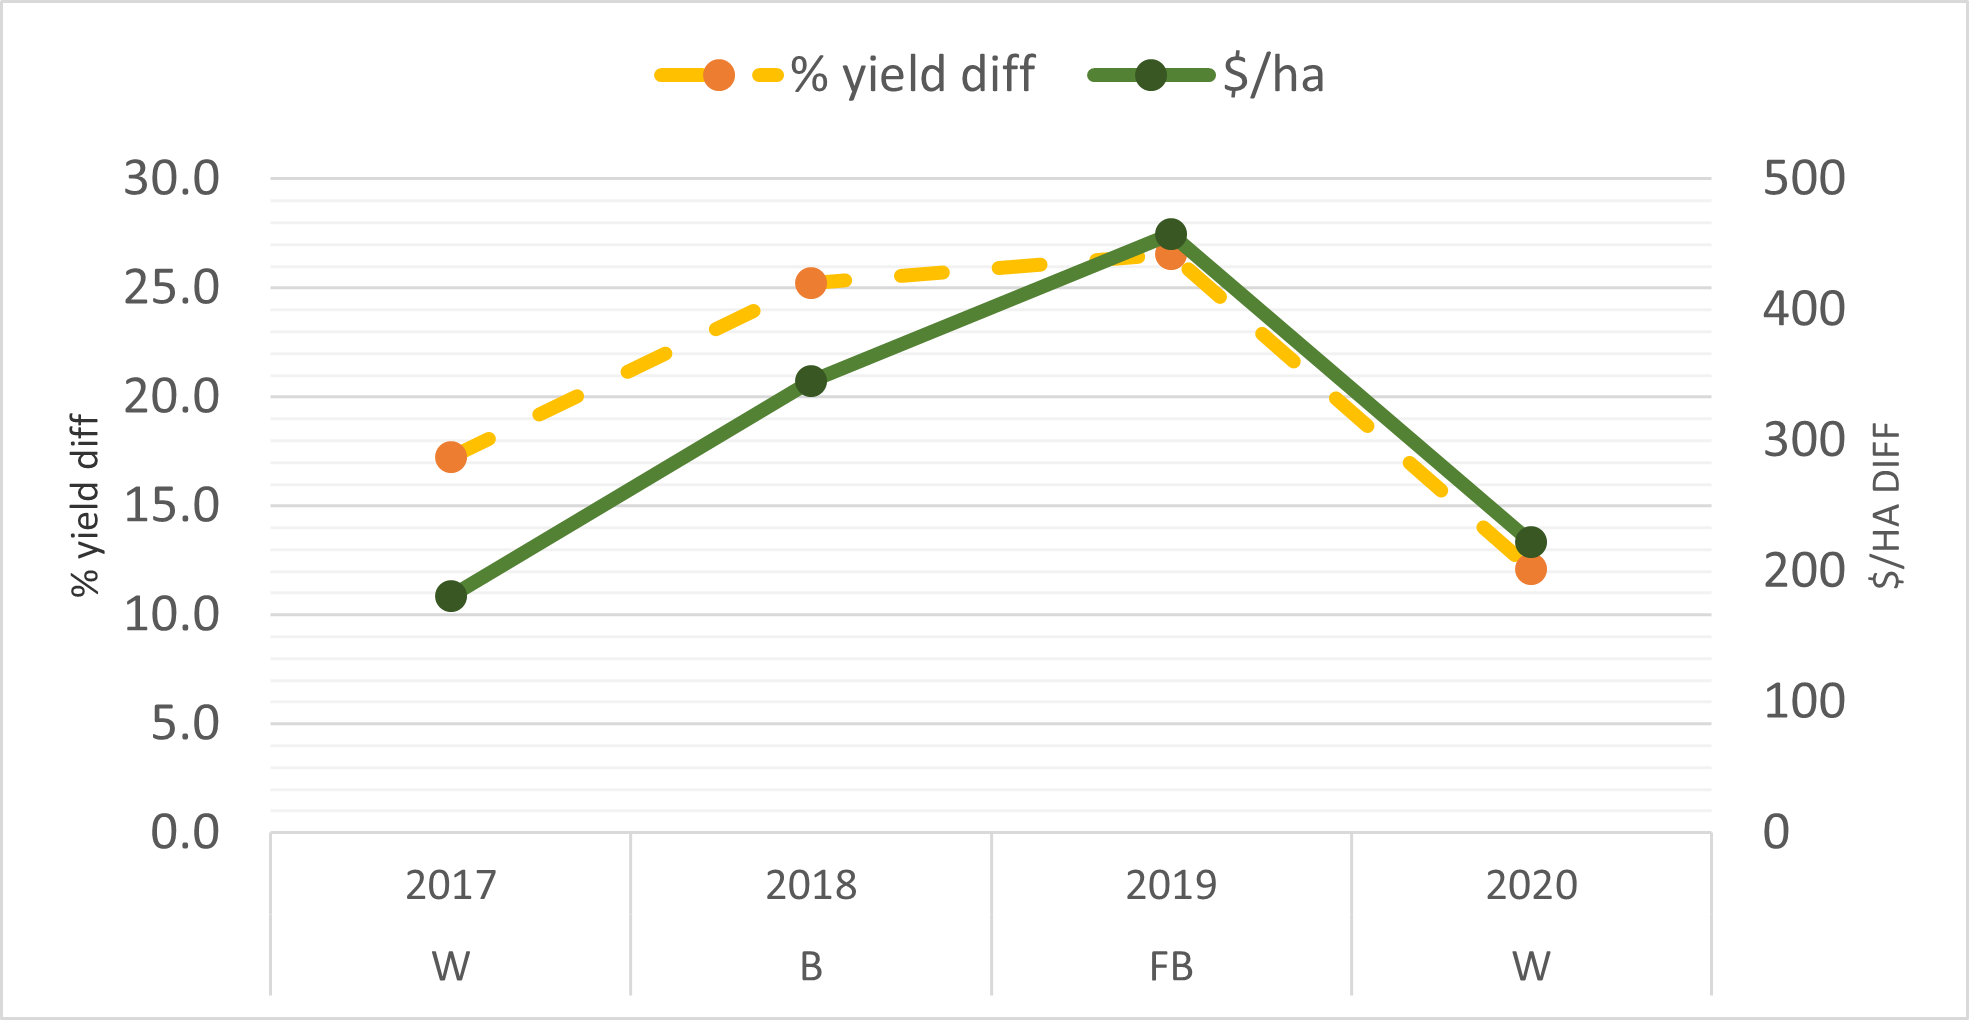 This line graph shows the estimated impact of using Trt 5 (deep placement of pea straw) as the % change in yield and gross margin ($/ha) when compared to grower standard practice